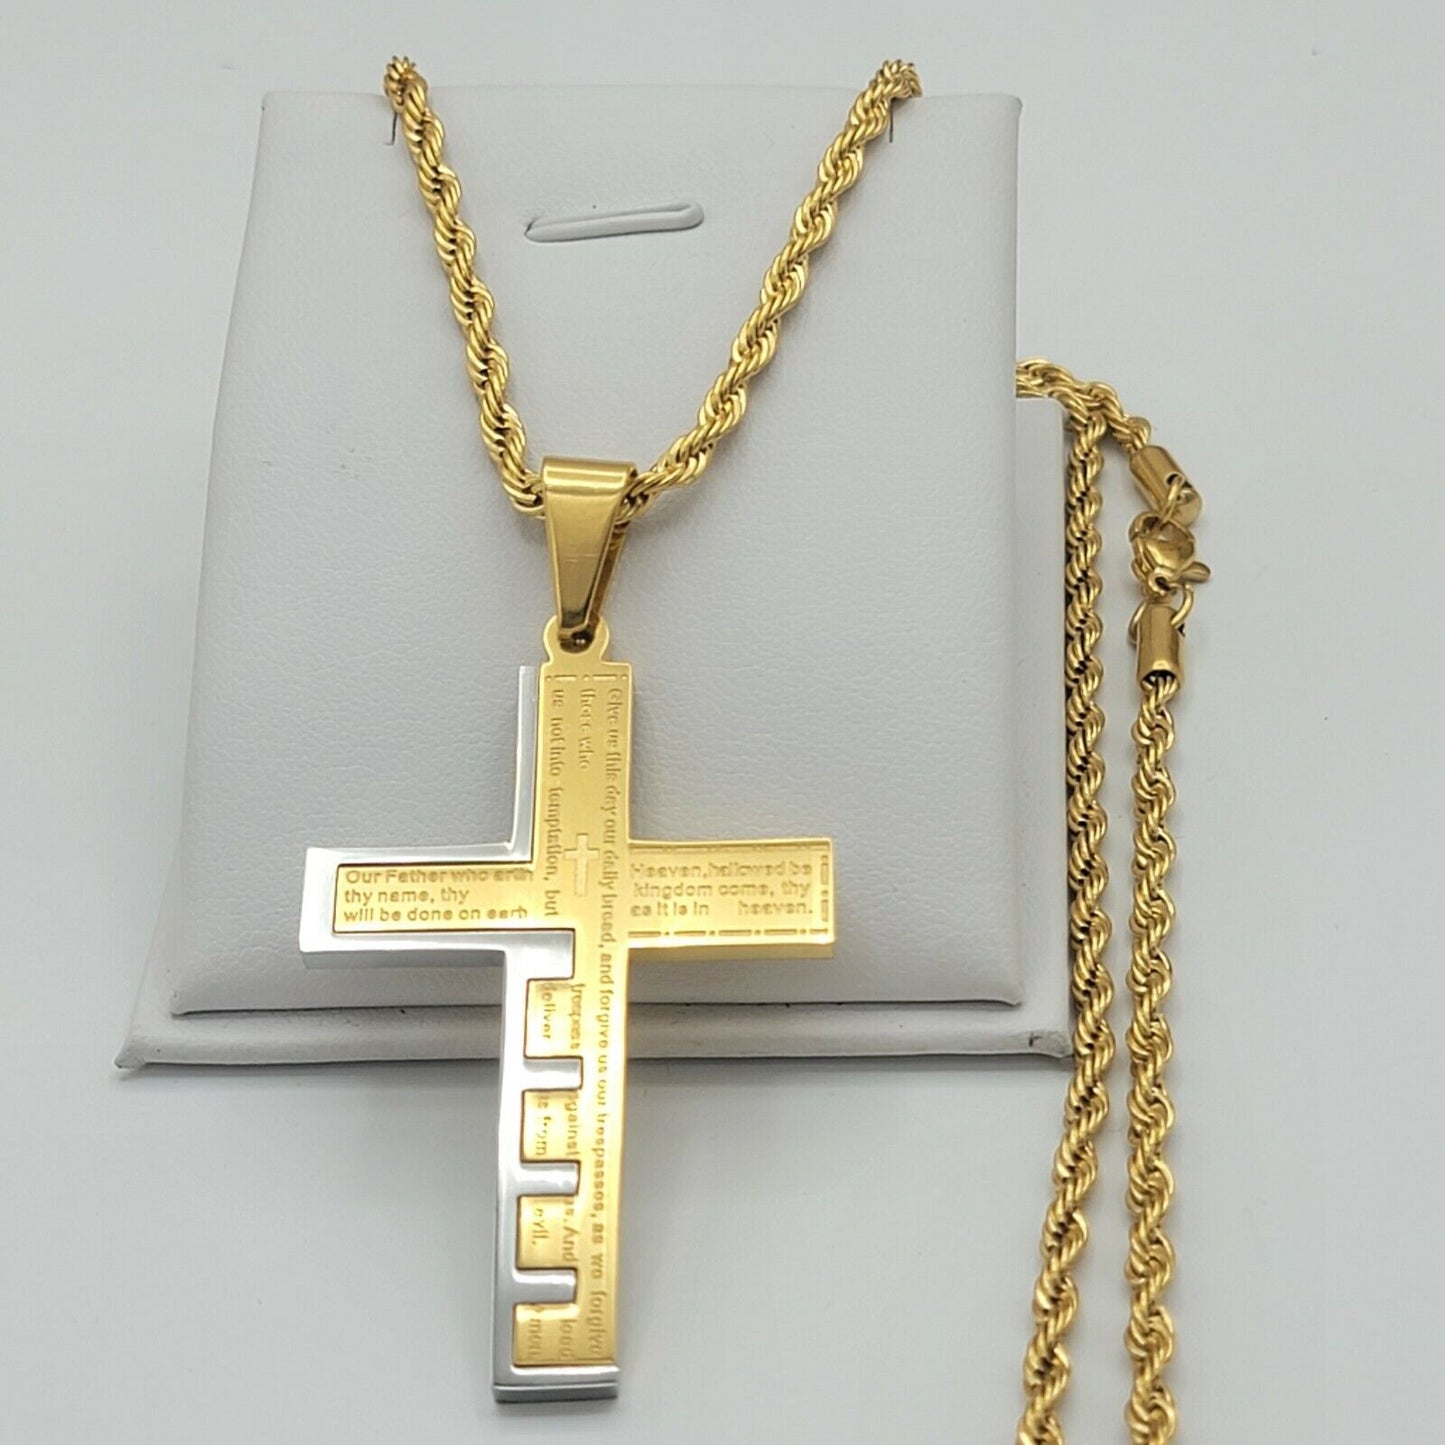 Necklaces - Stainless Steel Gold Plated. Bible Our Father Lord's Prayer Cross Pendant & Chain